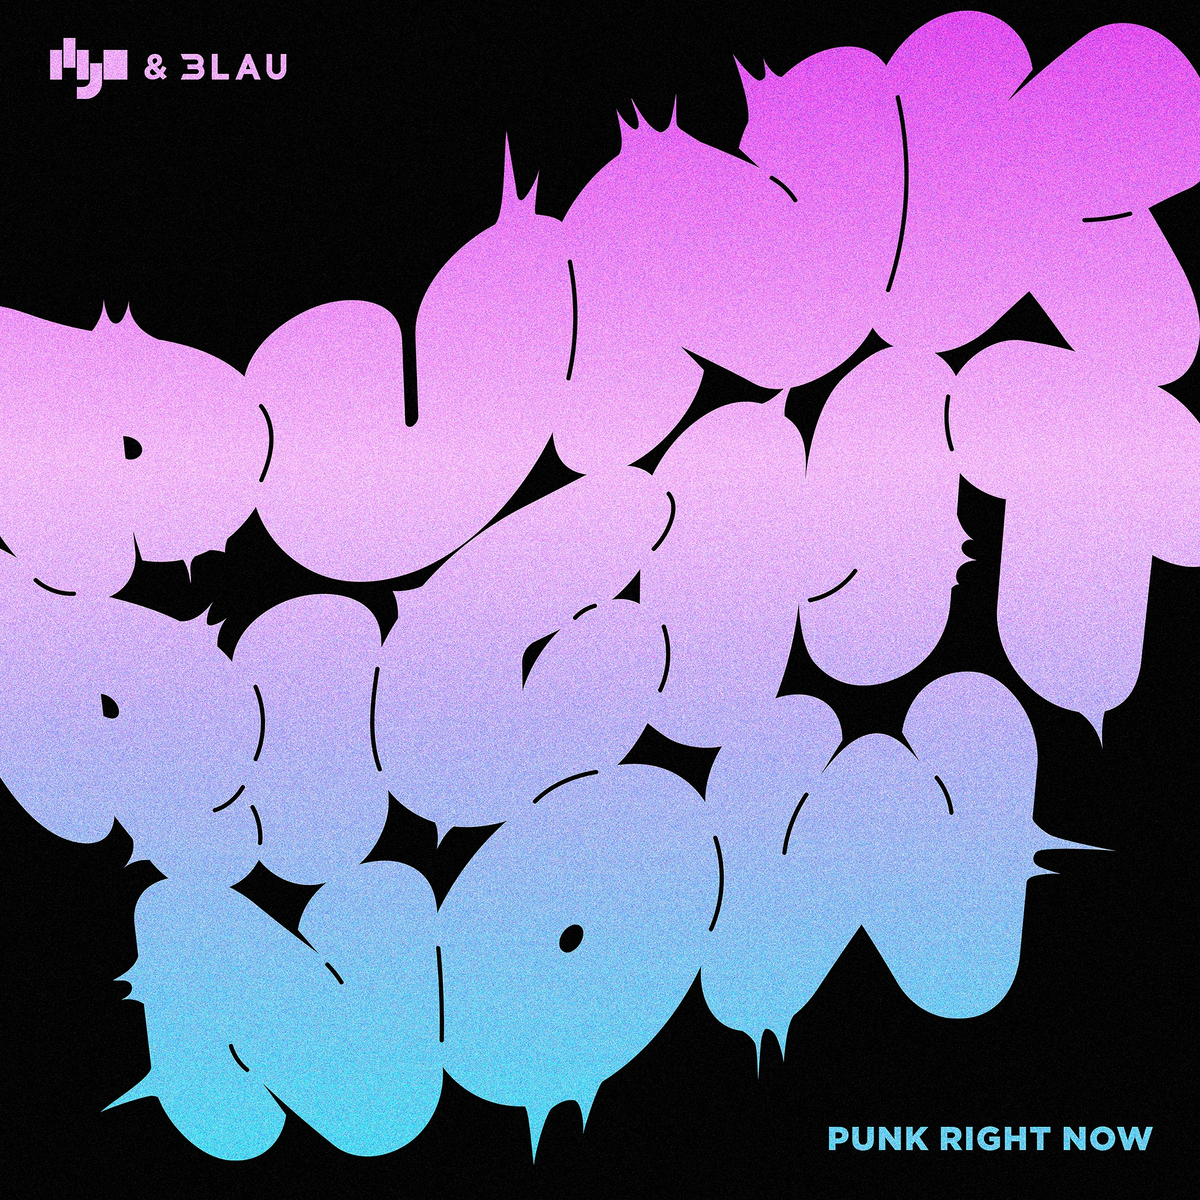 Right now на русский. Hyo Punk right Now. Punk right Now (English ver.)'. 3lau американский диджей. Right Now.